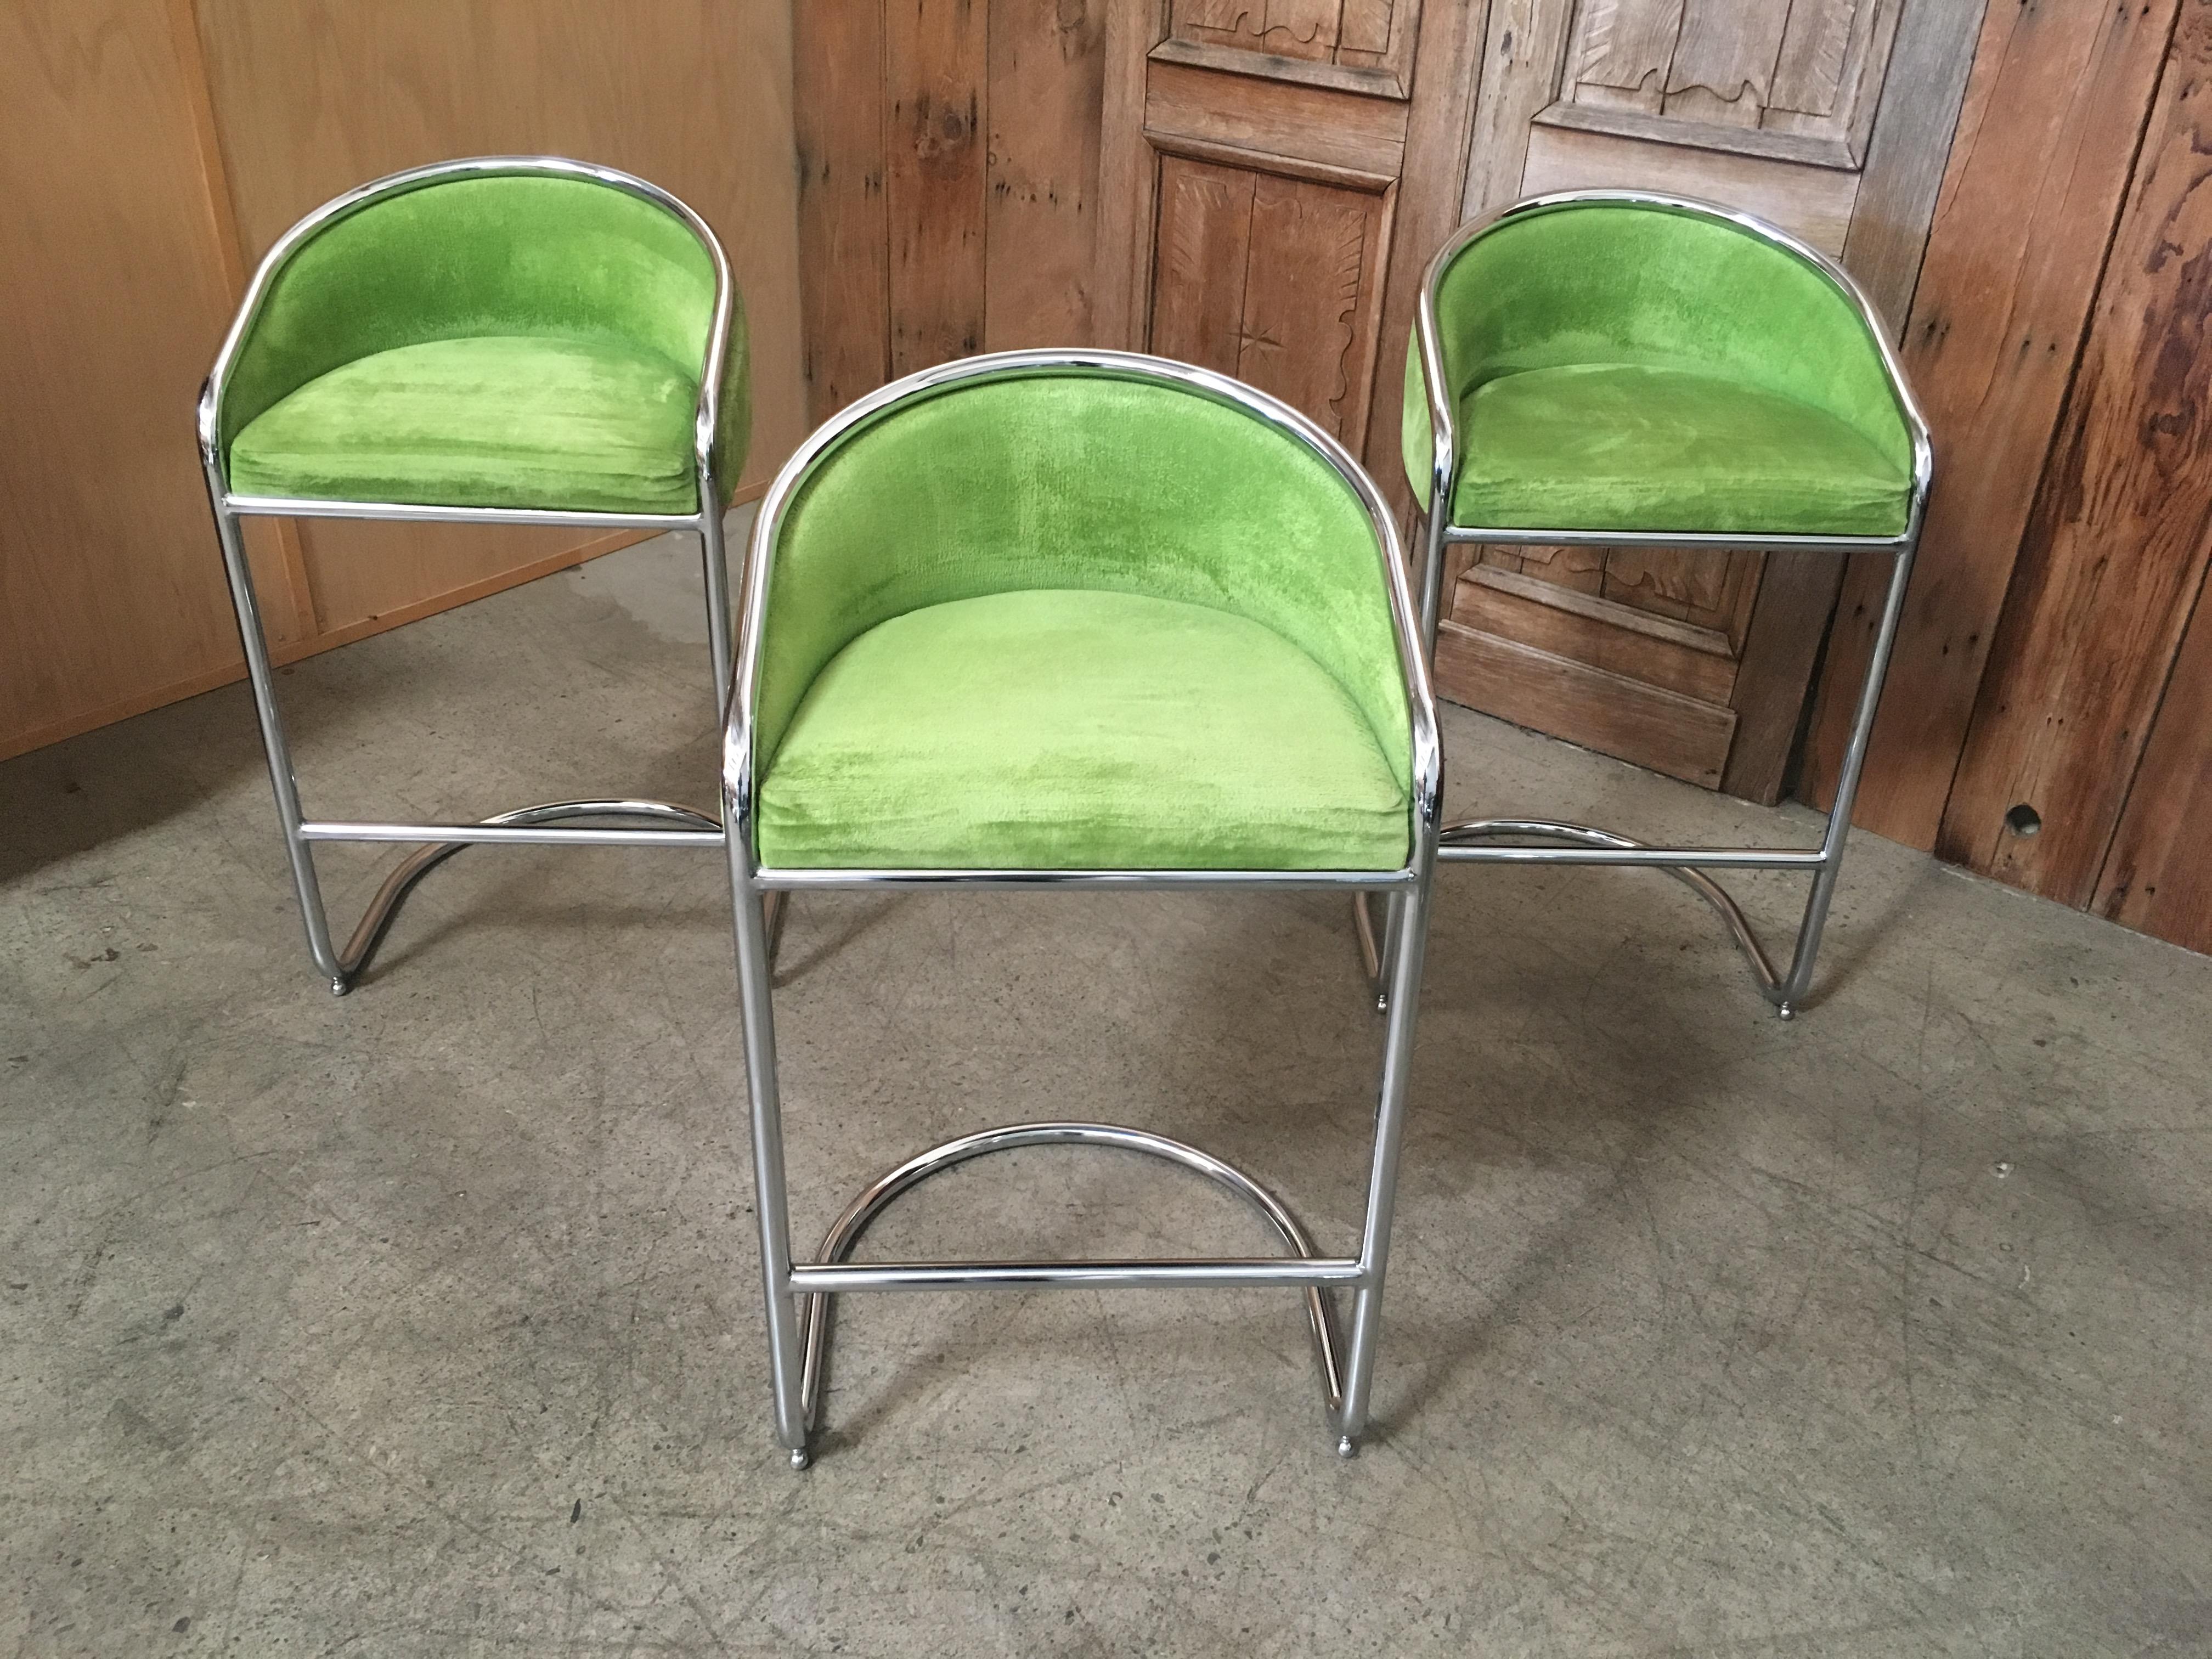 Set of three cantilevered bar stools made by Contemporary Shells inc.
Contemporary Shell Inc was based in Hempstead NY and produced works for many designers including Arthur Umanoff.